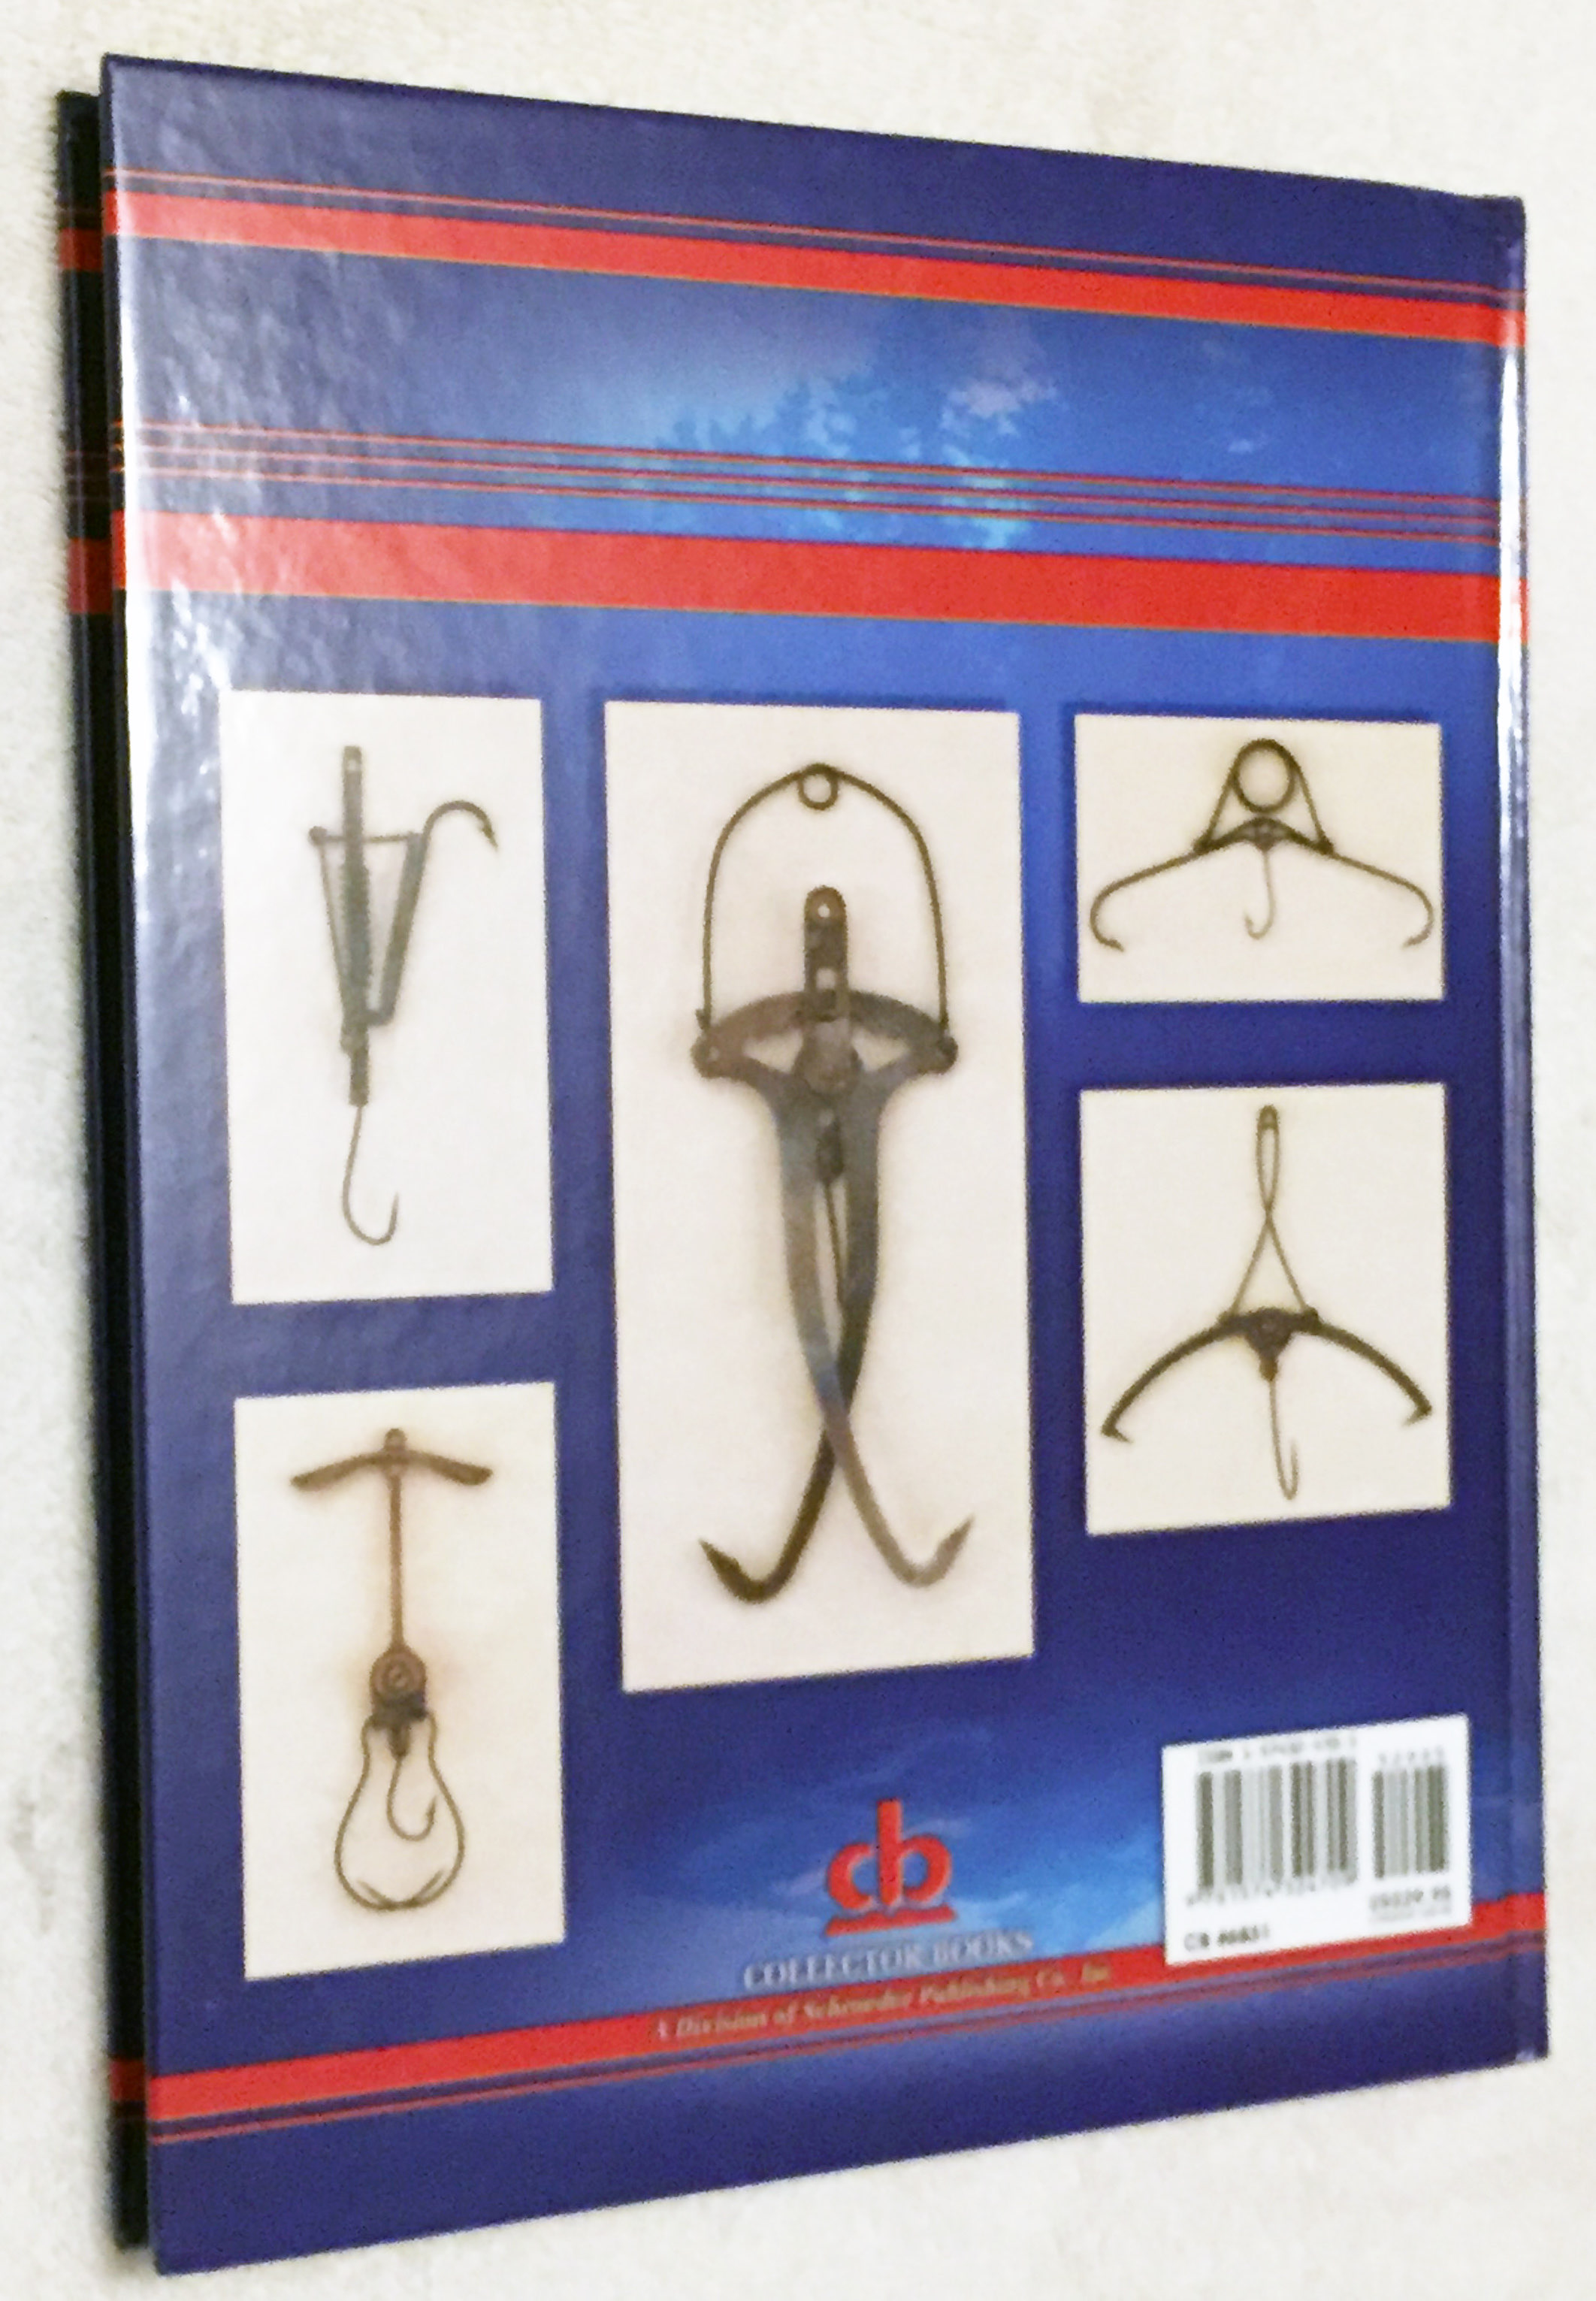 2006 Spring-Loaded Fish Hooks Traps & Lures BOOK